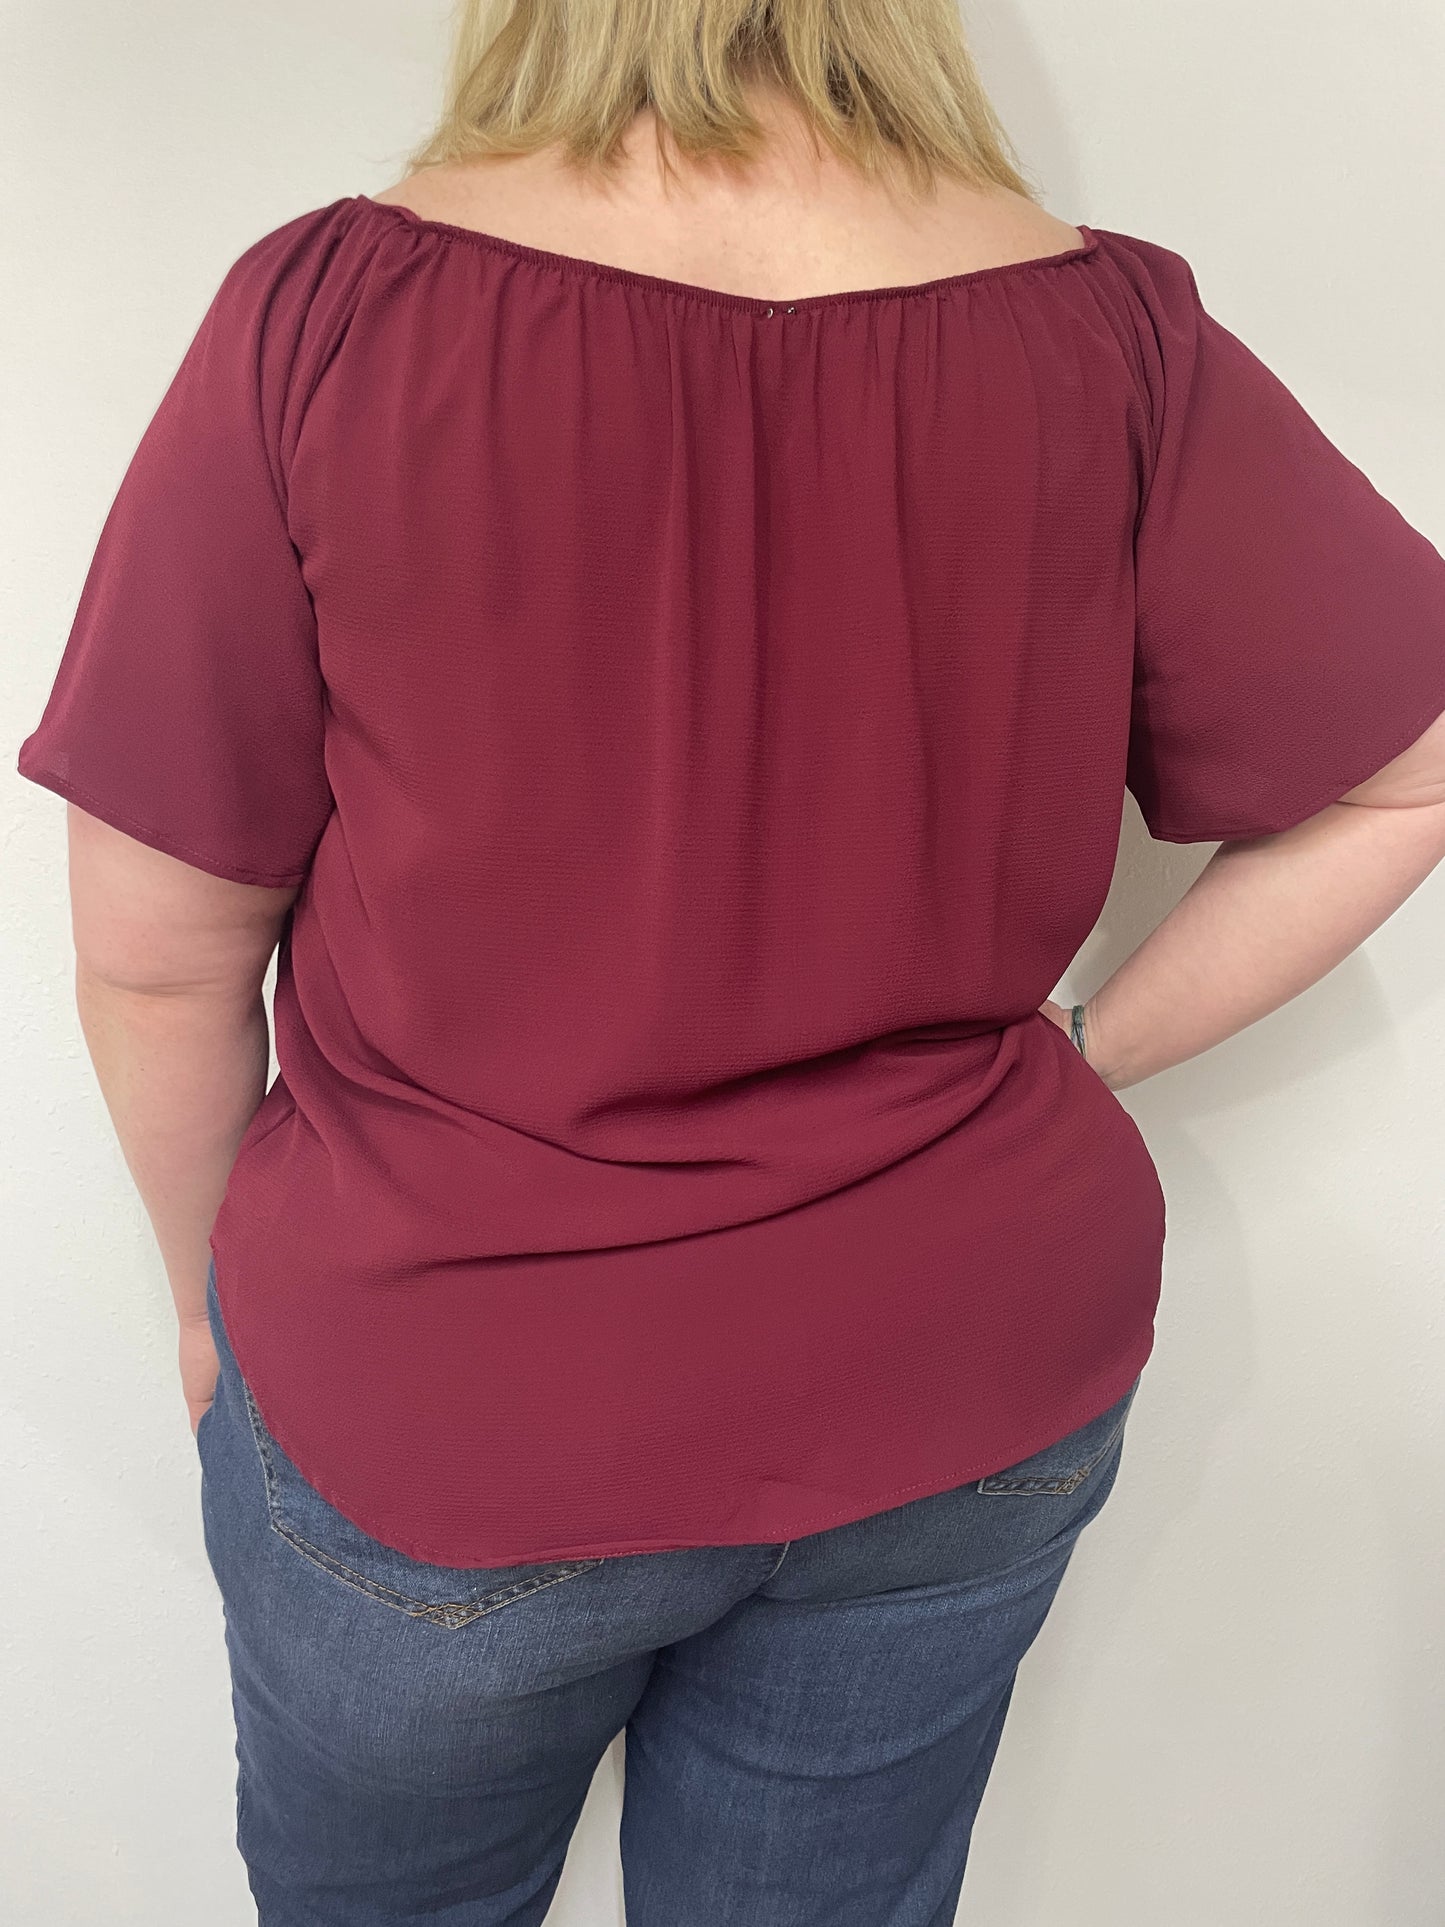 BACK TO BUSINESS TIE TOP